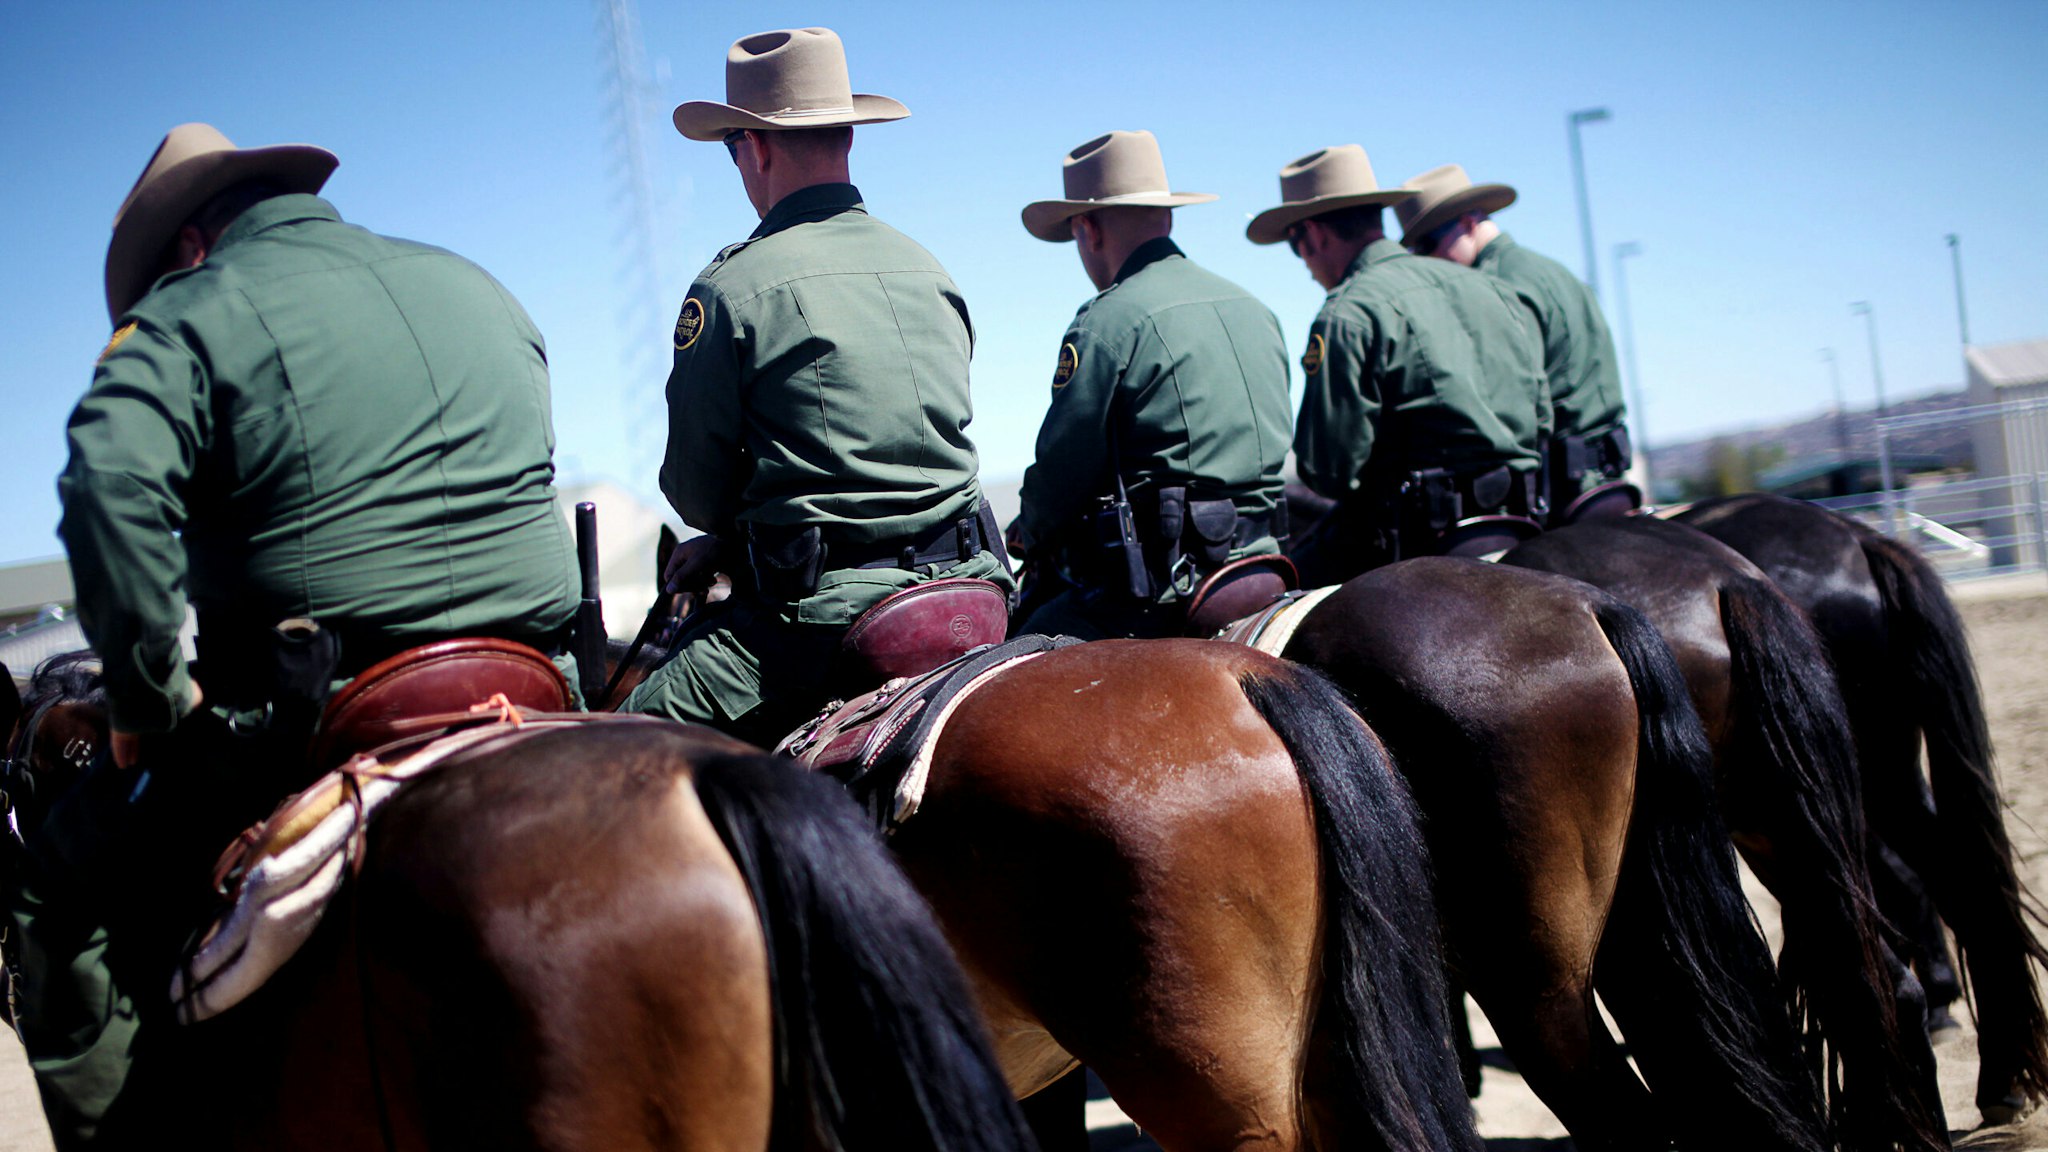 Border Patrol Agents listen to an instructor during training exercises at the Boulevard Customs and Border Protection Station in Boulevard, California on Tuesday, July 30, 2013. The U.S. Border Patrol plans to add asecondhorsepatrolunit for about ten horses at a new facility in rural Boulevard, about 60 miles east of San Diego, near the Mexicanborder in September. The border patrol has long relied on horses to police theborder because the animals are less expensive and last longer than vehicles